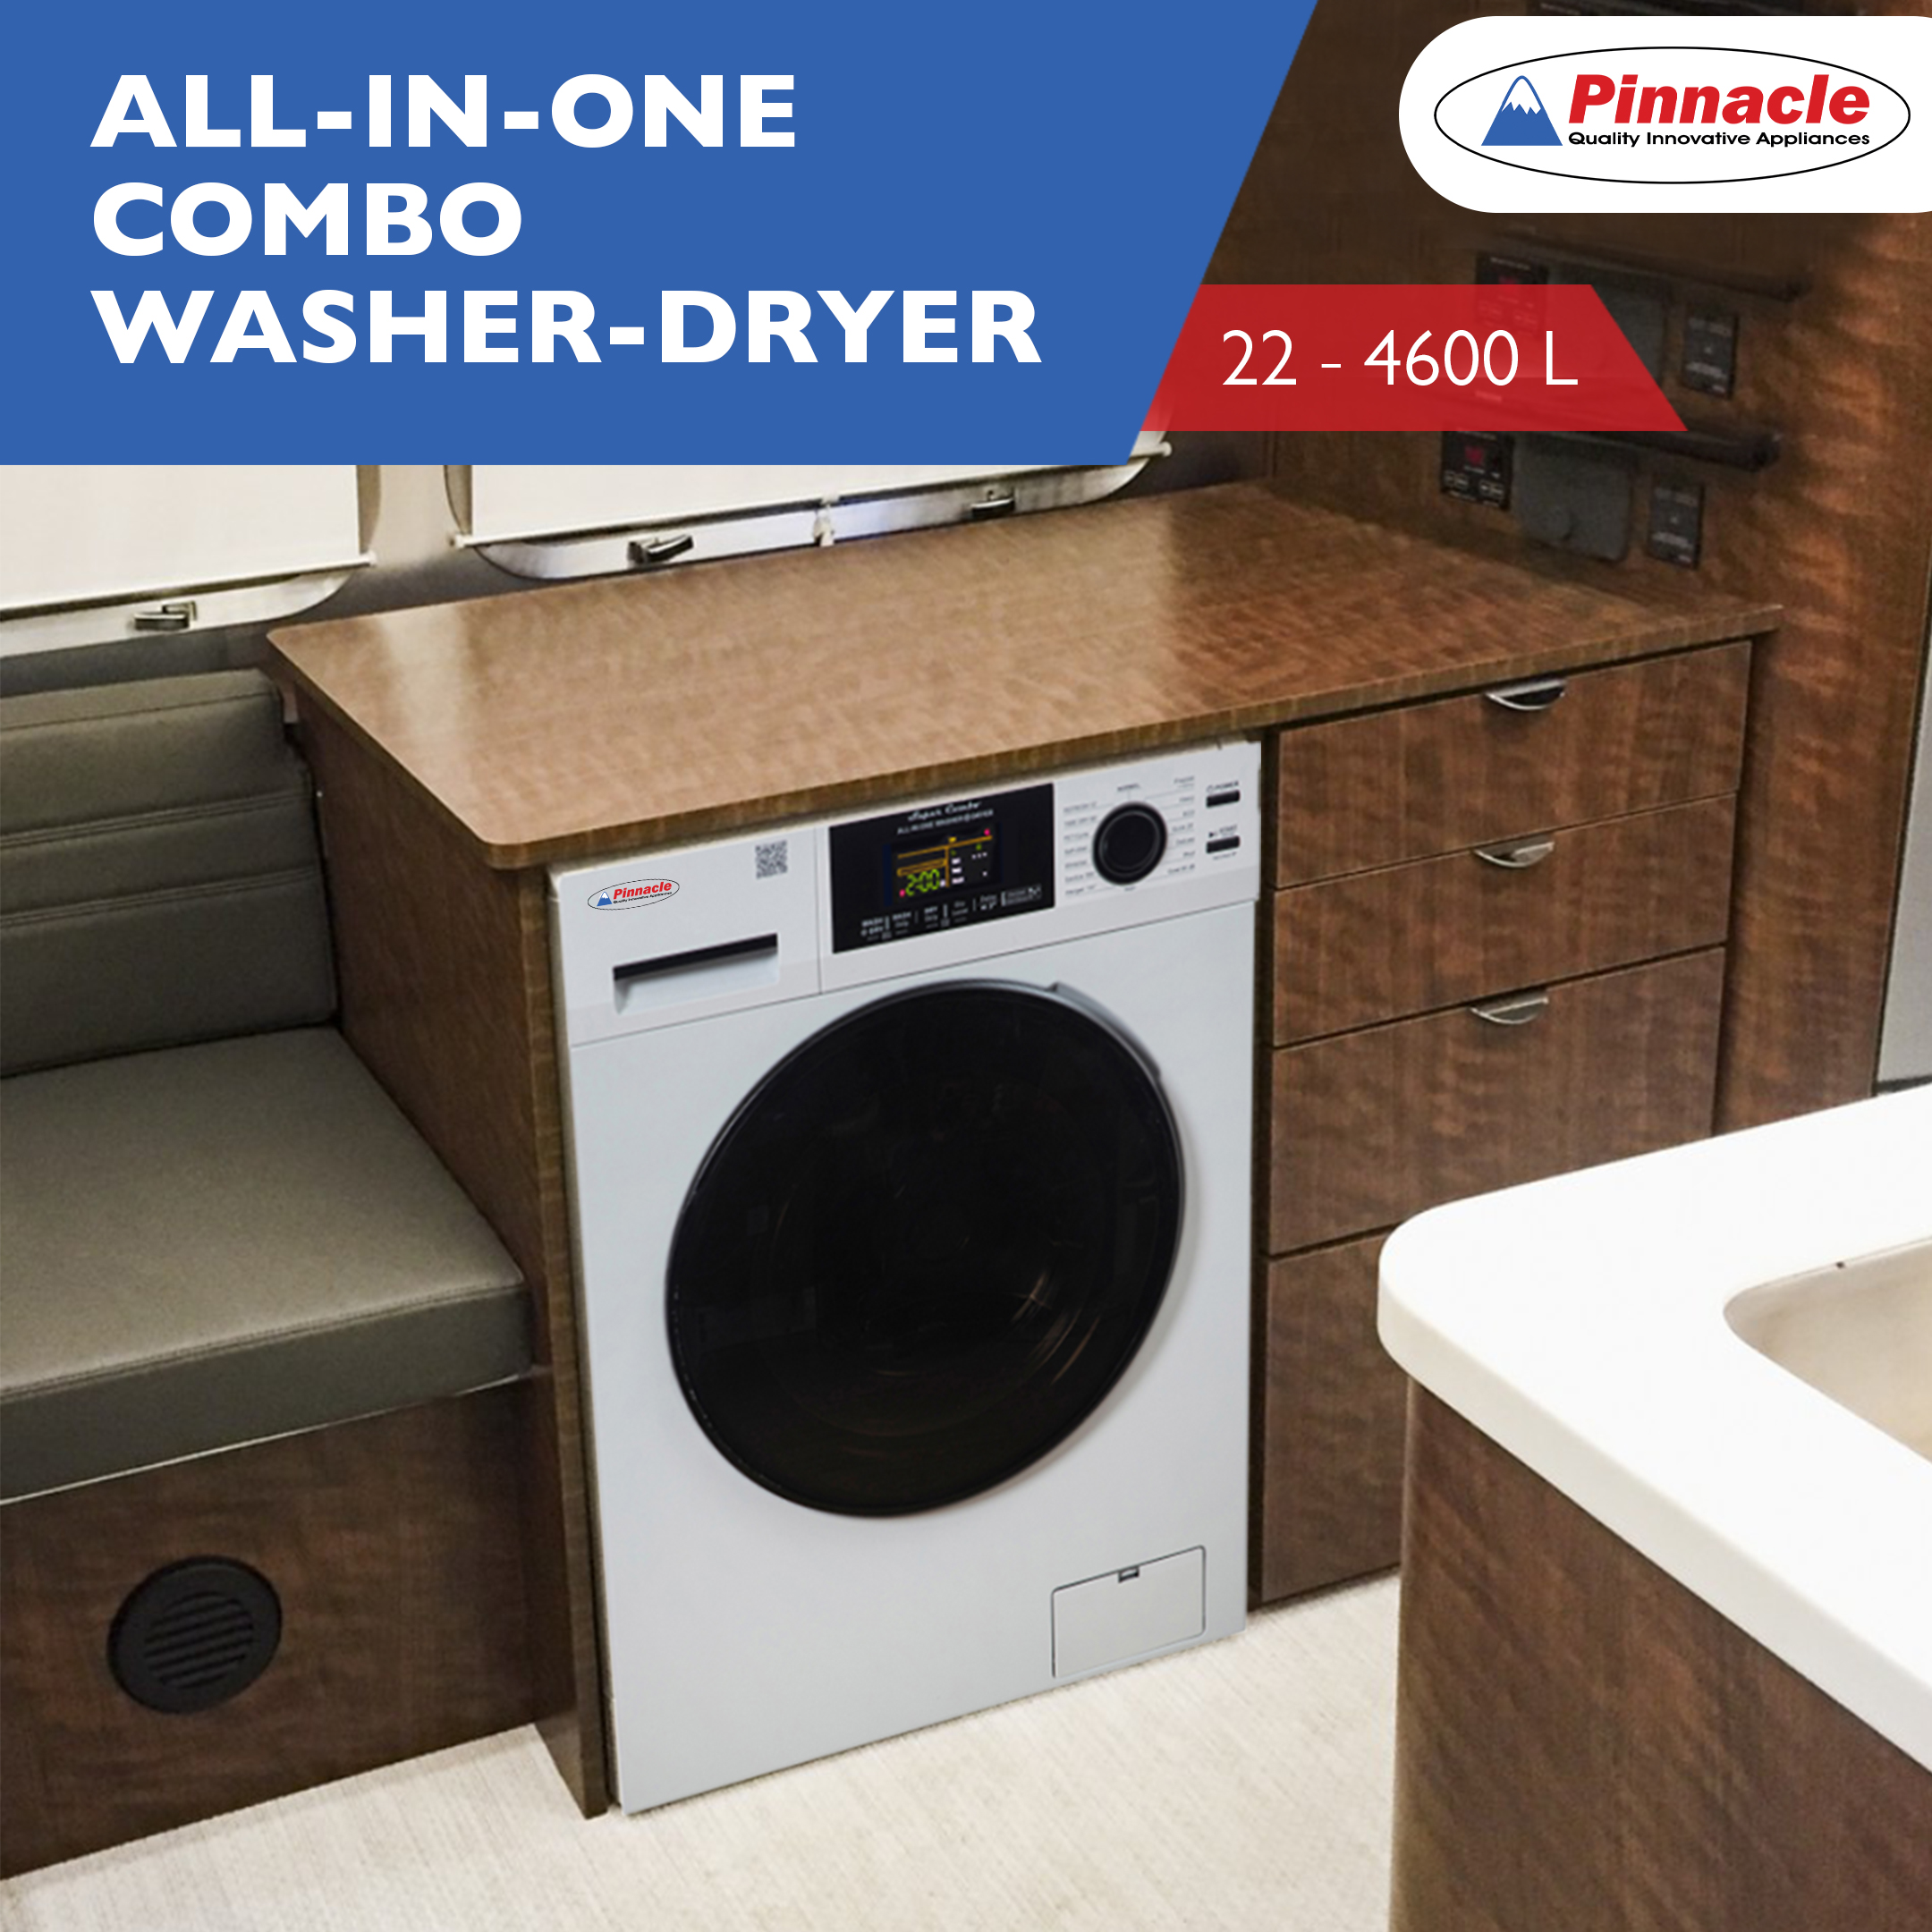 Pinnacle Set To Launch Innovative, RV-Ready All-In-One Combo Washer-Dryer